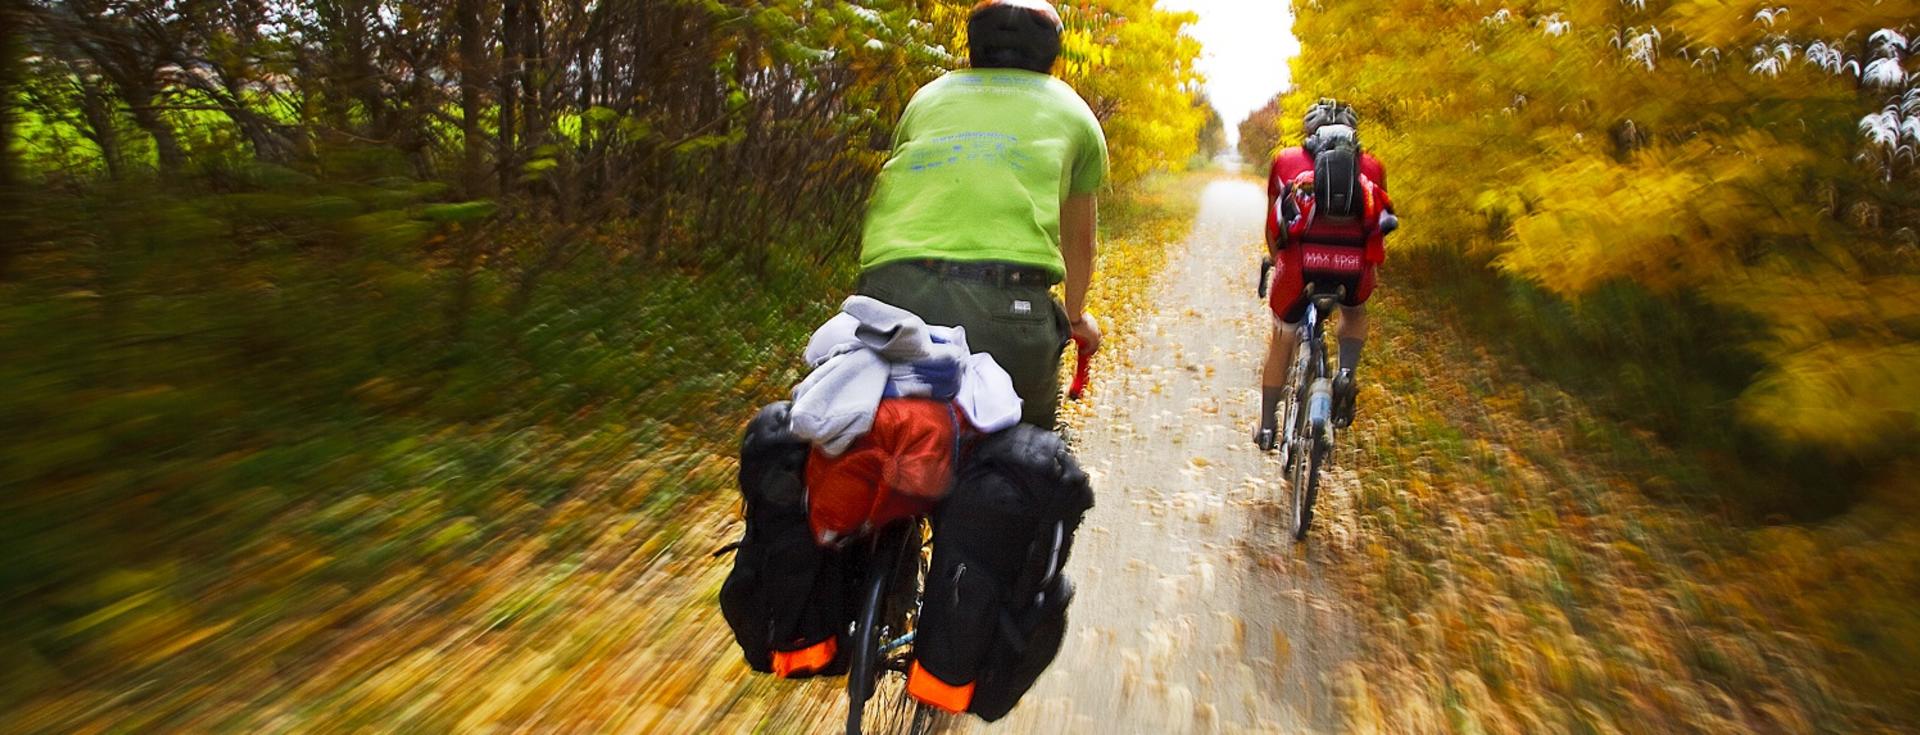 How to Dress for Cold Weather Cycling - Ontario Bike Trails